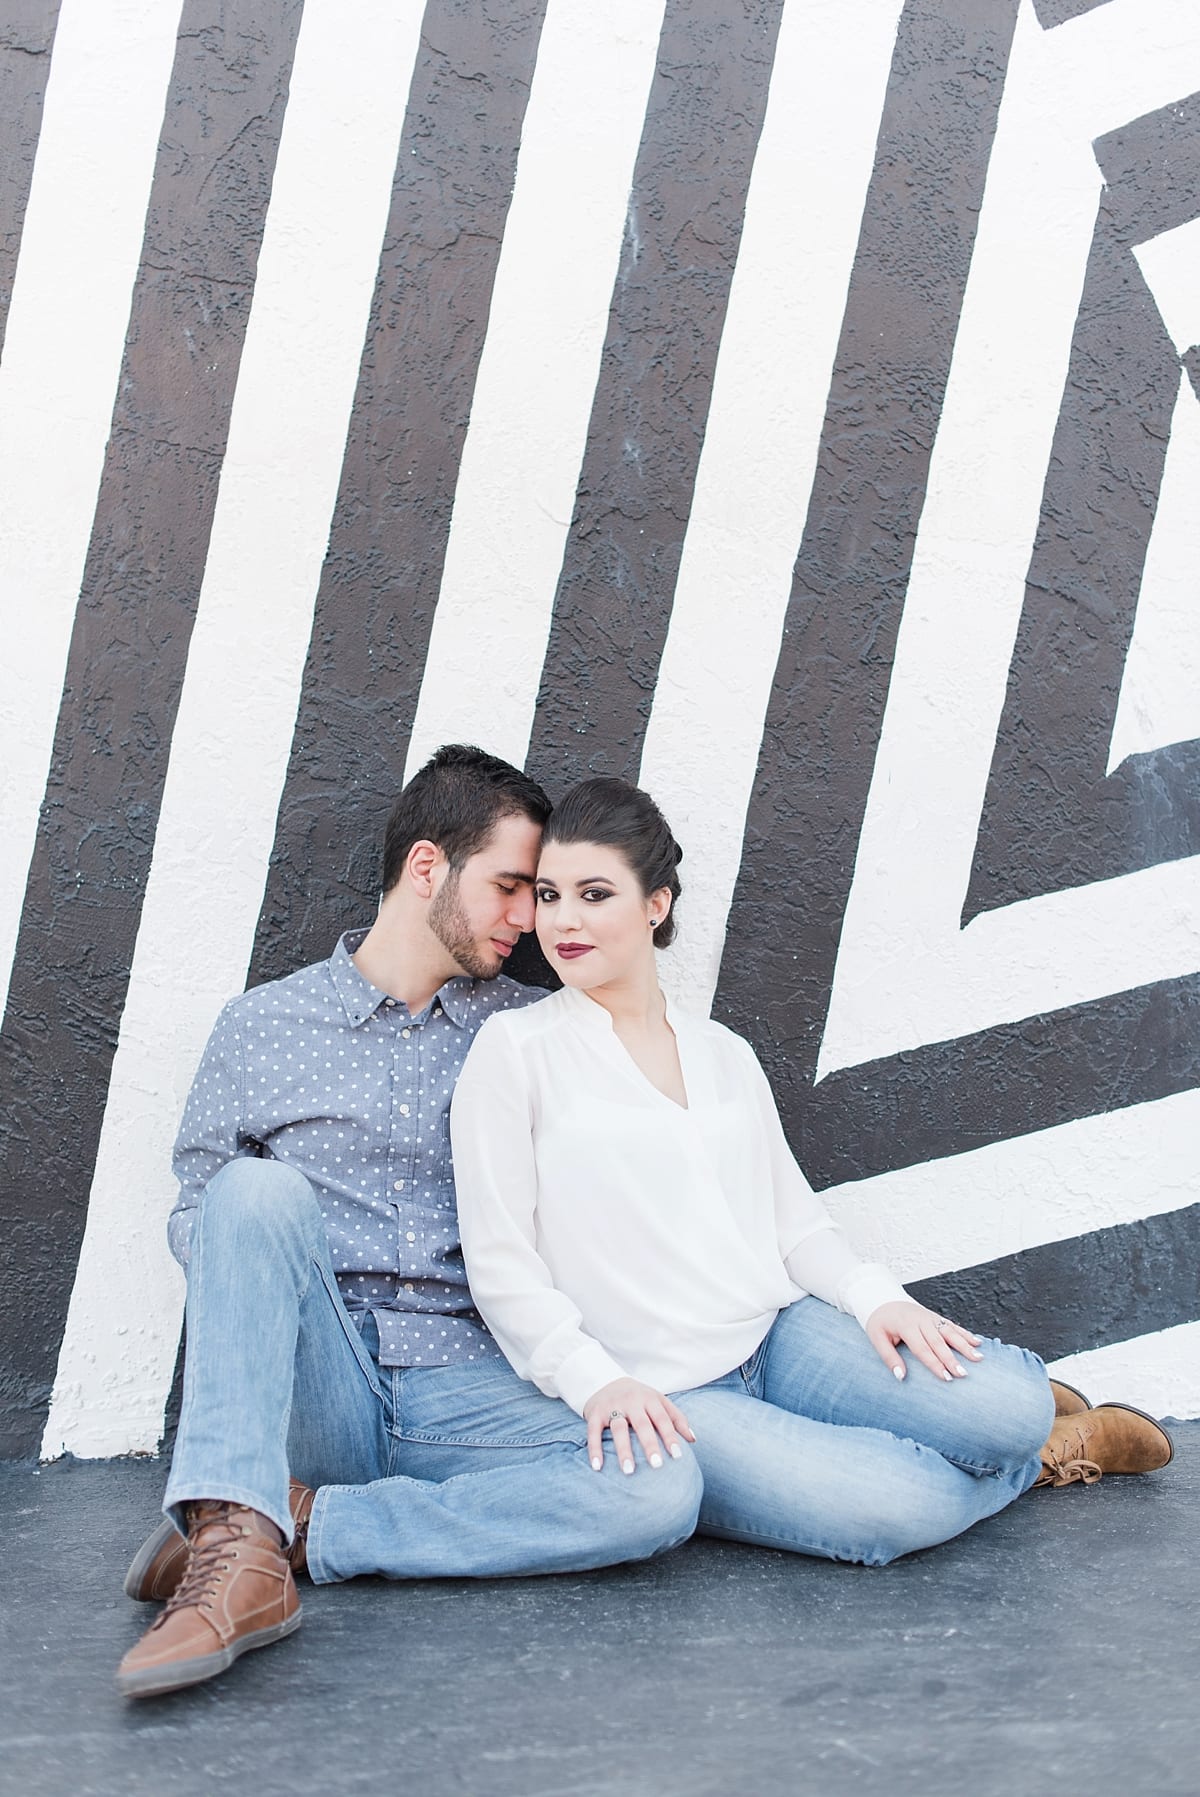 Wynwood-Walls-Engagement-Pictures_0438